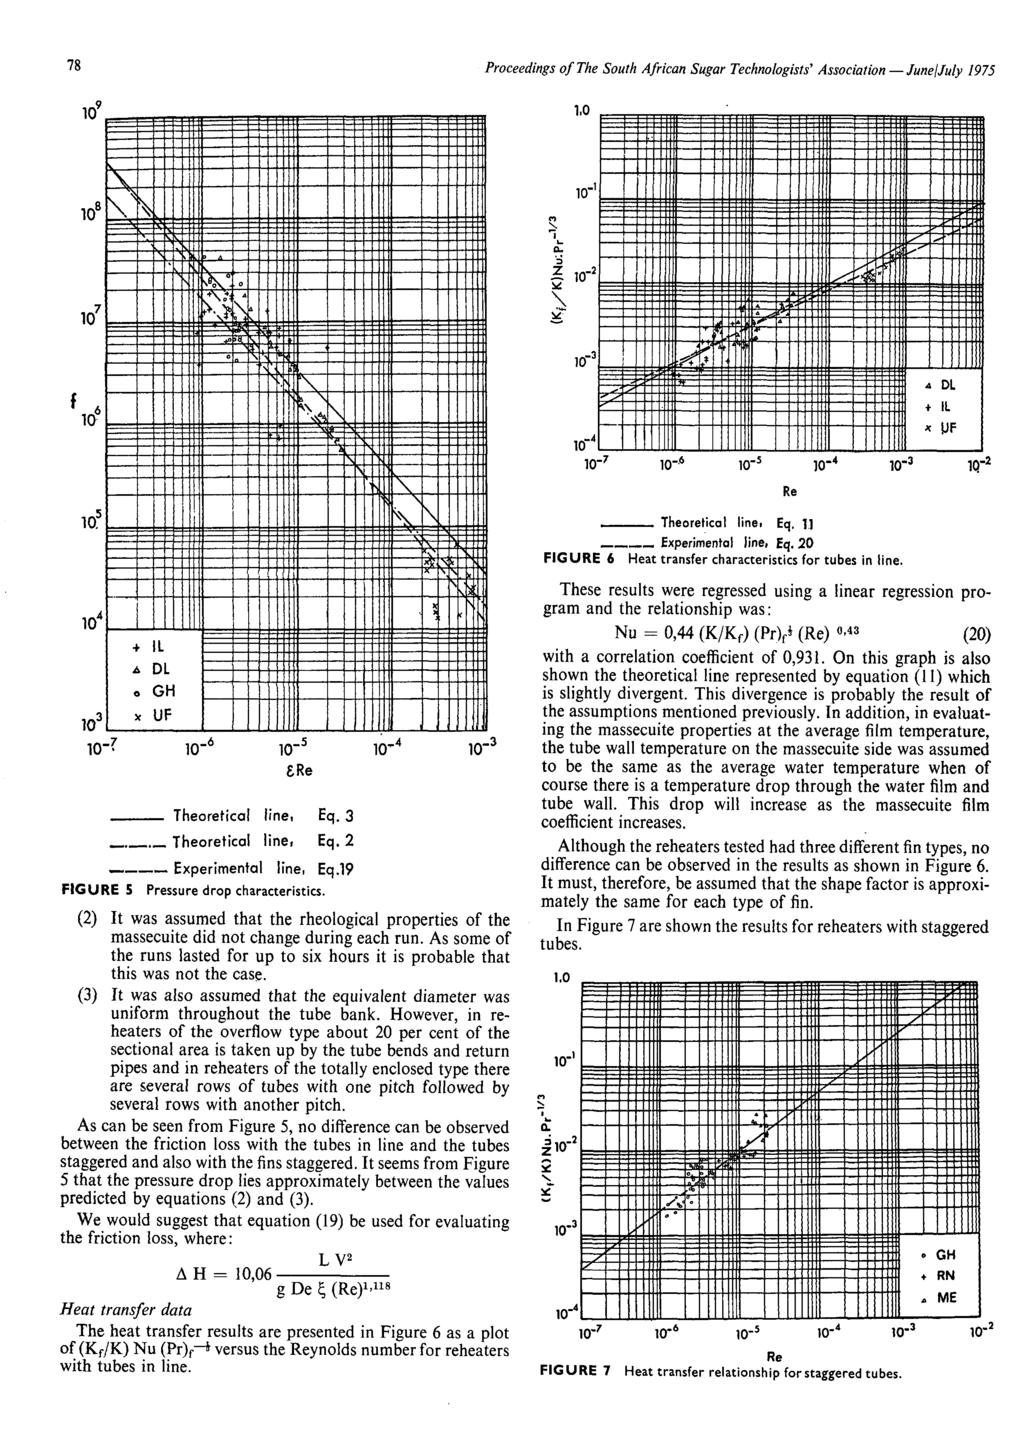 78 Proceedings of The South African Sugar Technologists' Association JunelJuly 1975 Theoretical line, Eq. 3,.,., Theoretical line, Eq. 2 Experimental line, Eq.